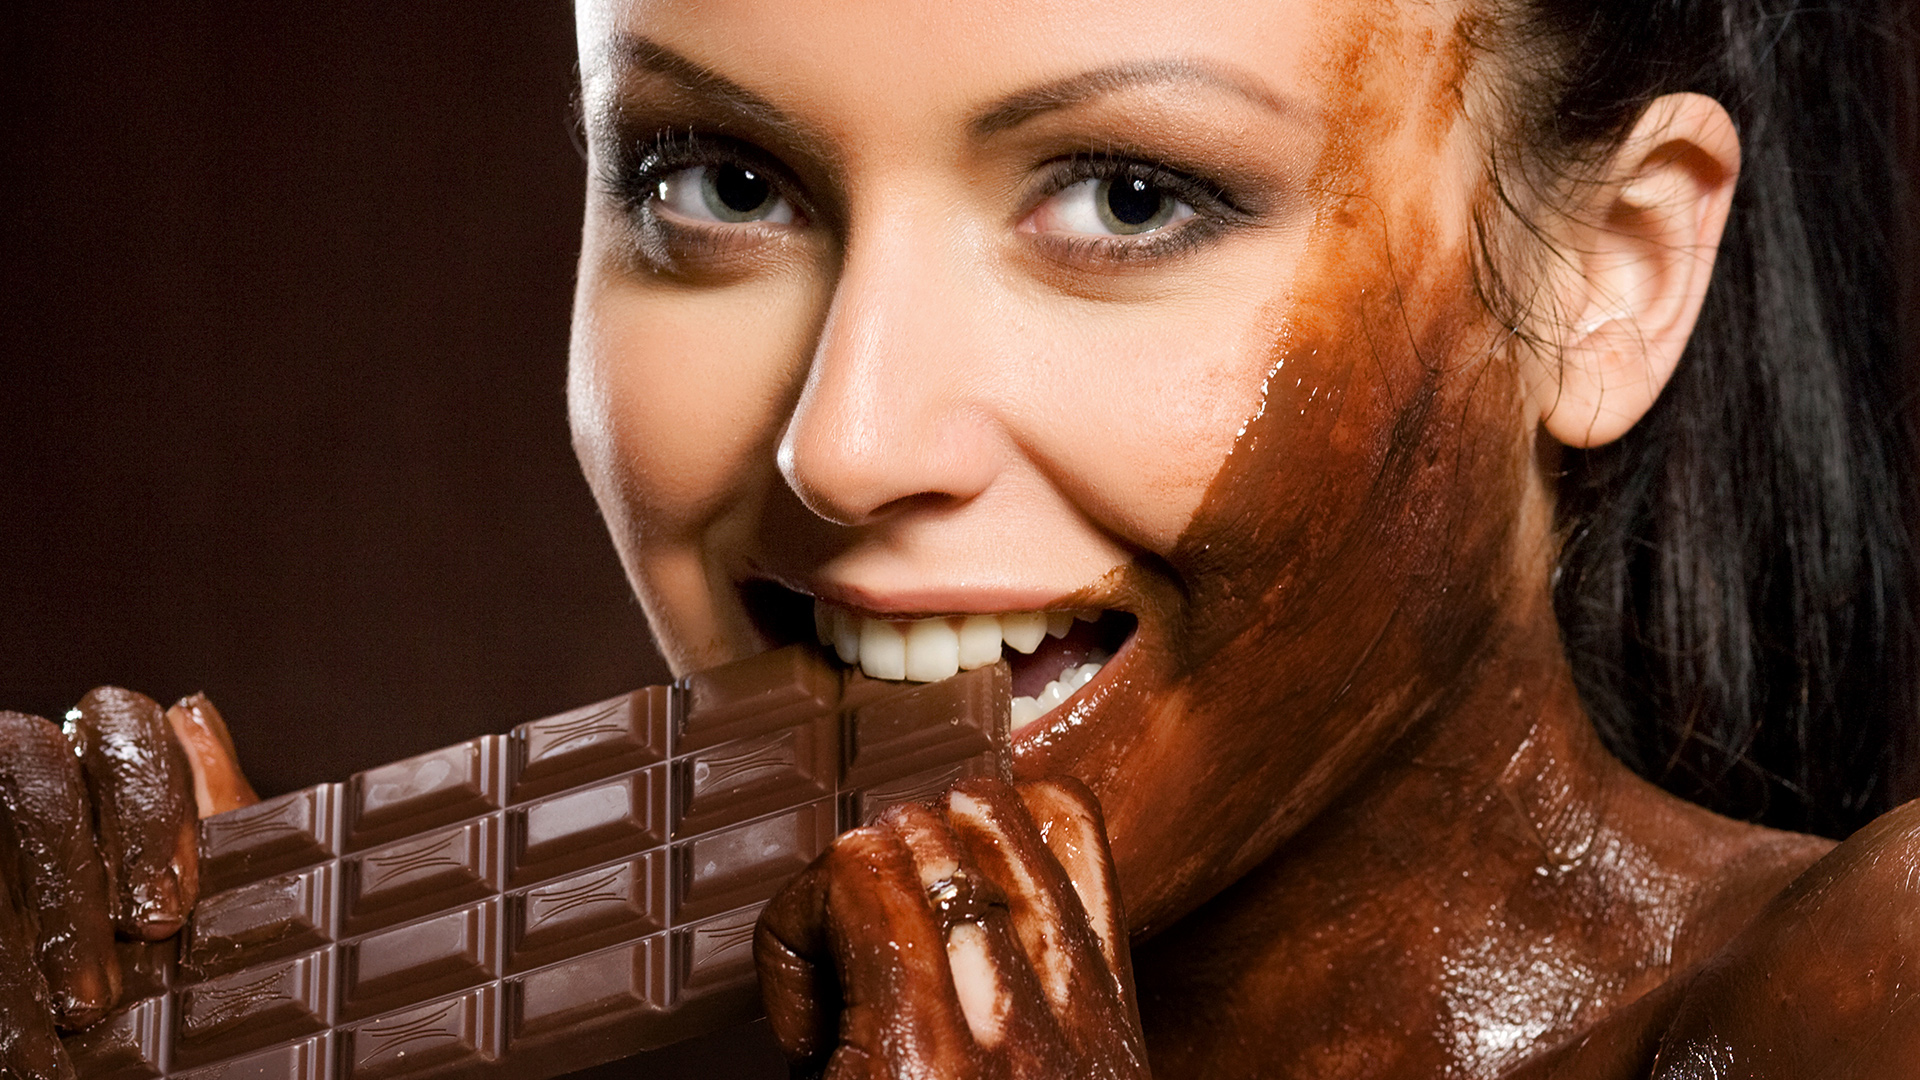 Wallpaper Girl Sweet Tooth Loves Chocolate All Smeared With It